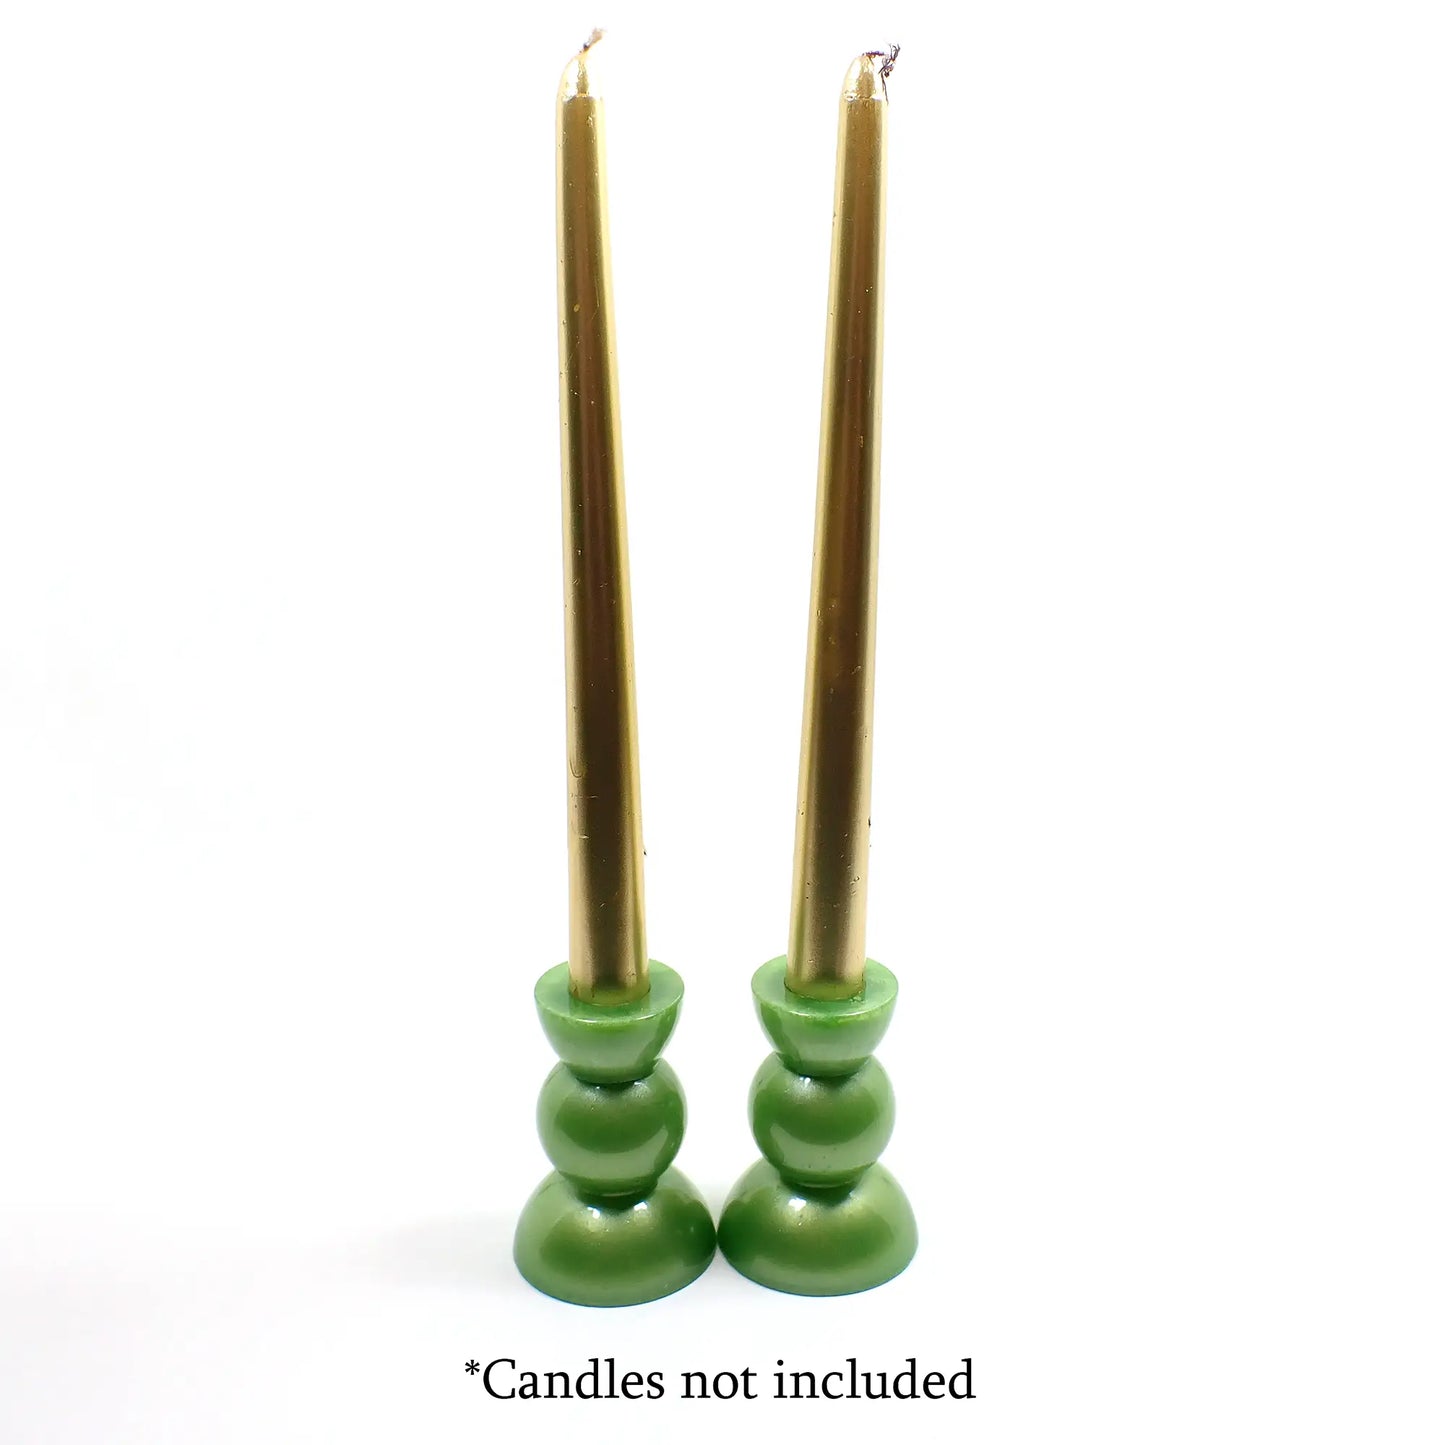 Set of Two Handmade Pearly Lime Green Resin Rounded Geometric Candlestick Holders